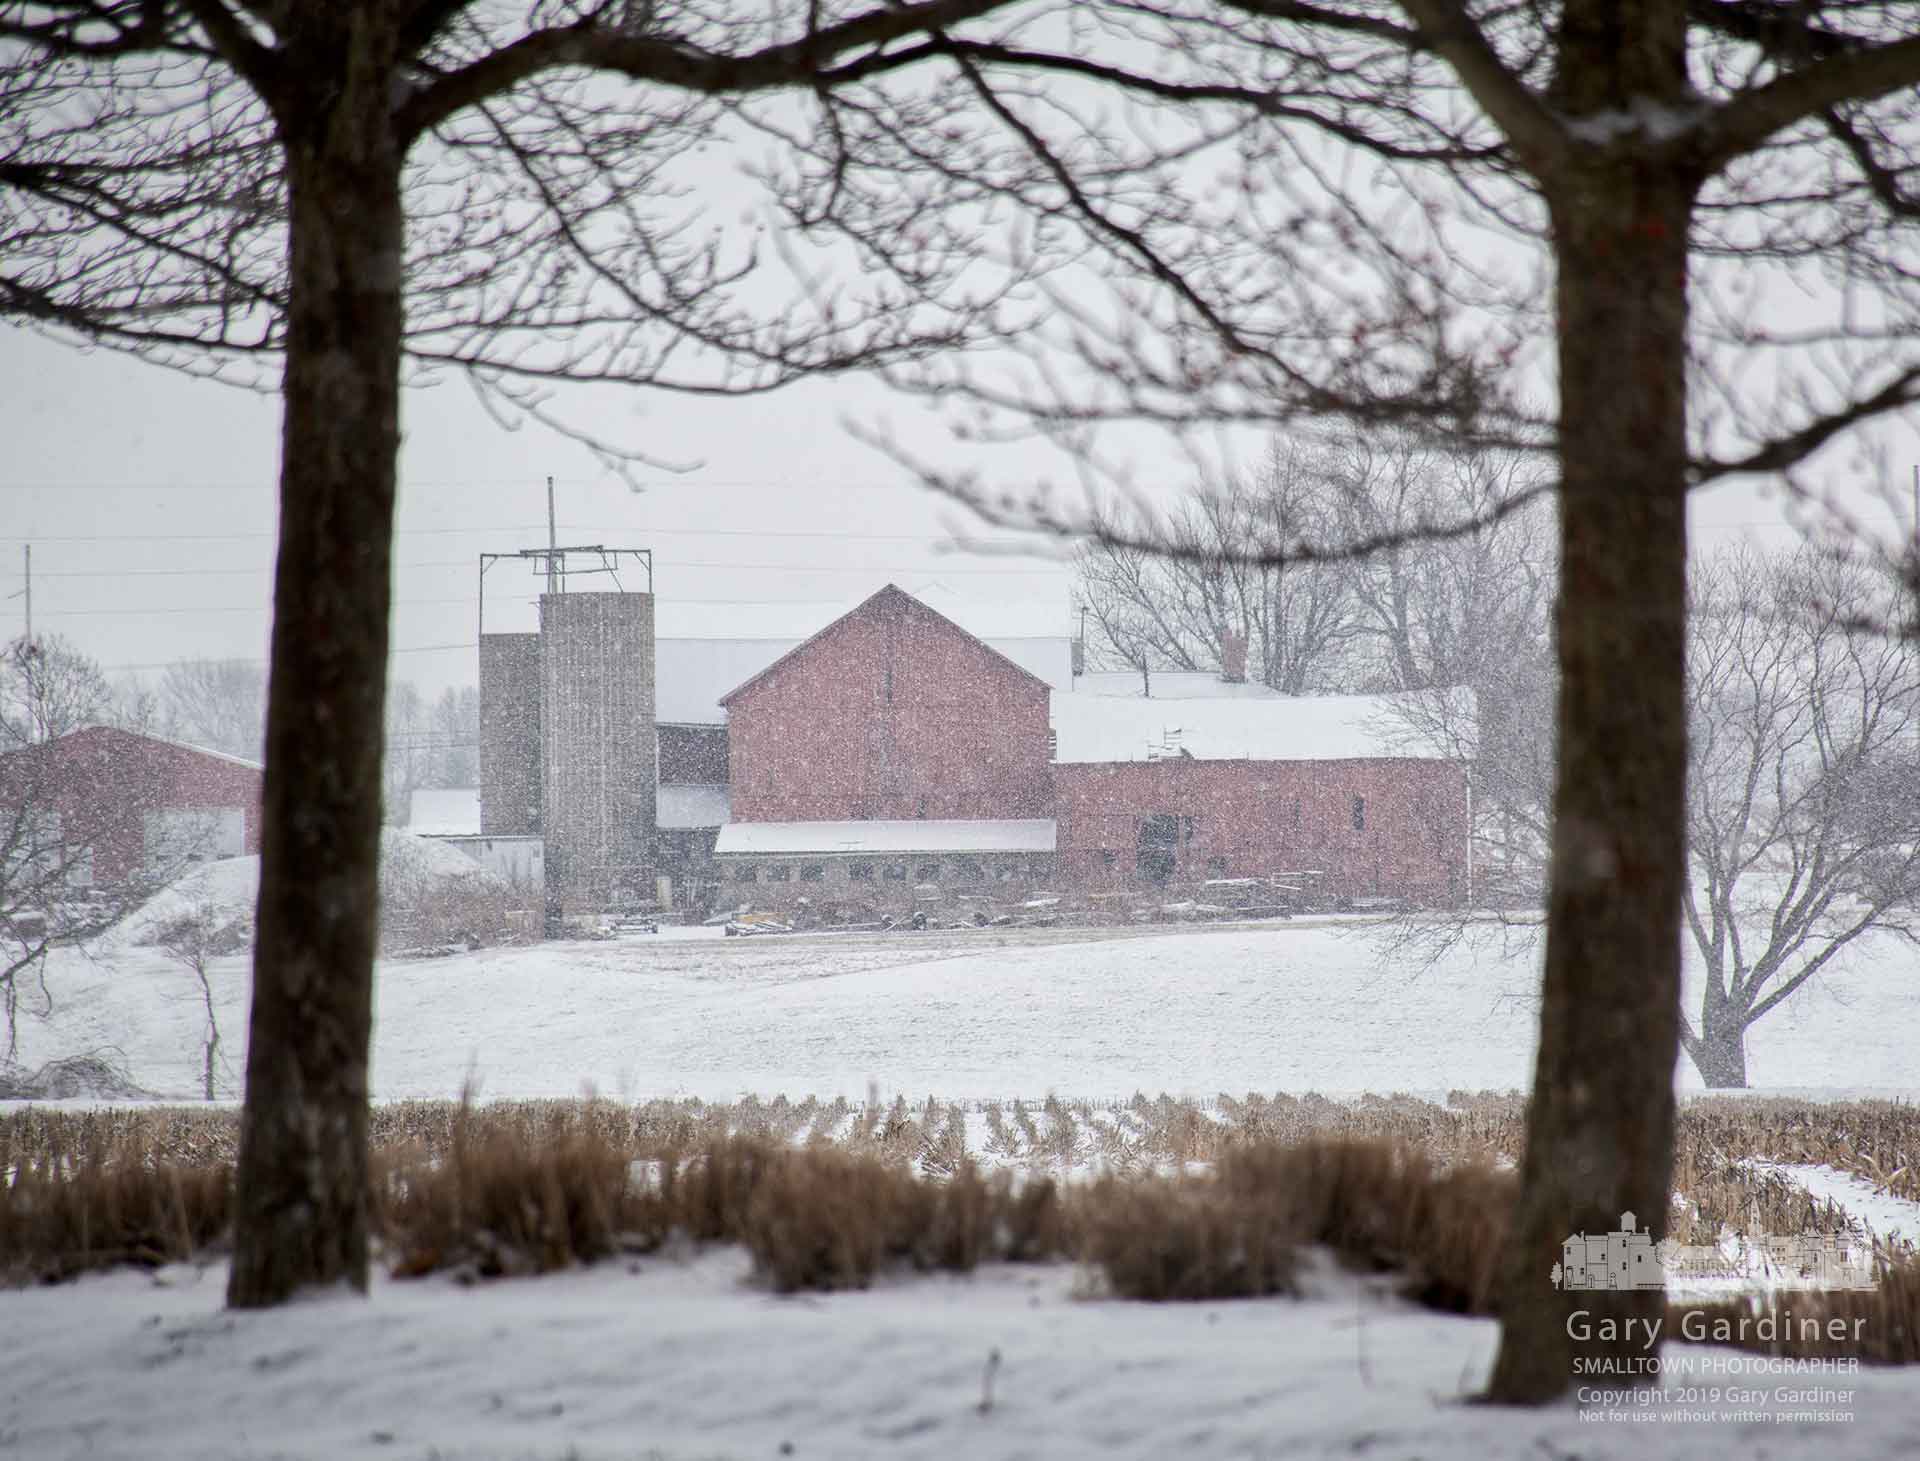 A morning snow squall blows across the open field below the Yarnell farm on Africa Road in Westerville. My Final Photo for Jan. 26, 2019.